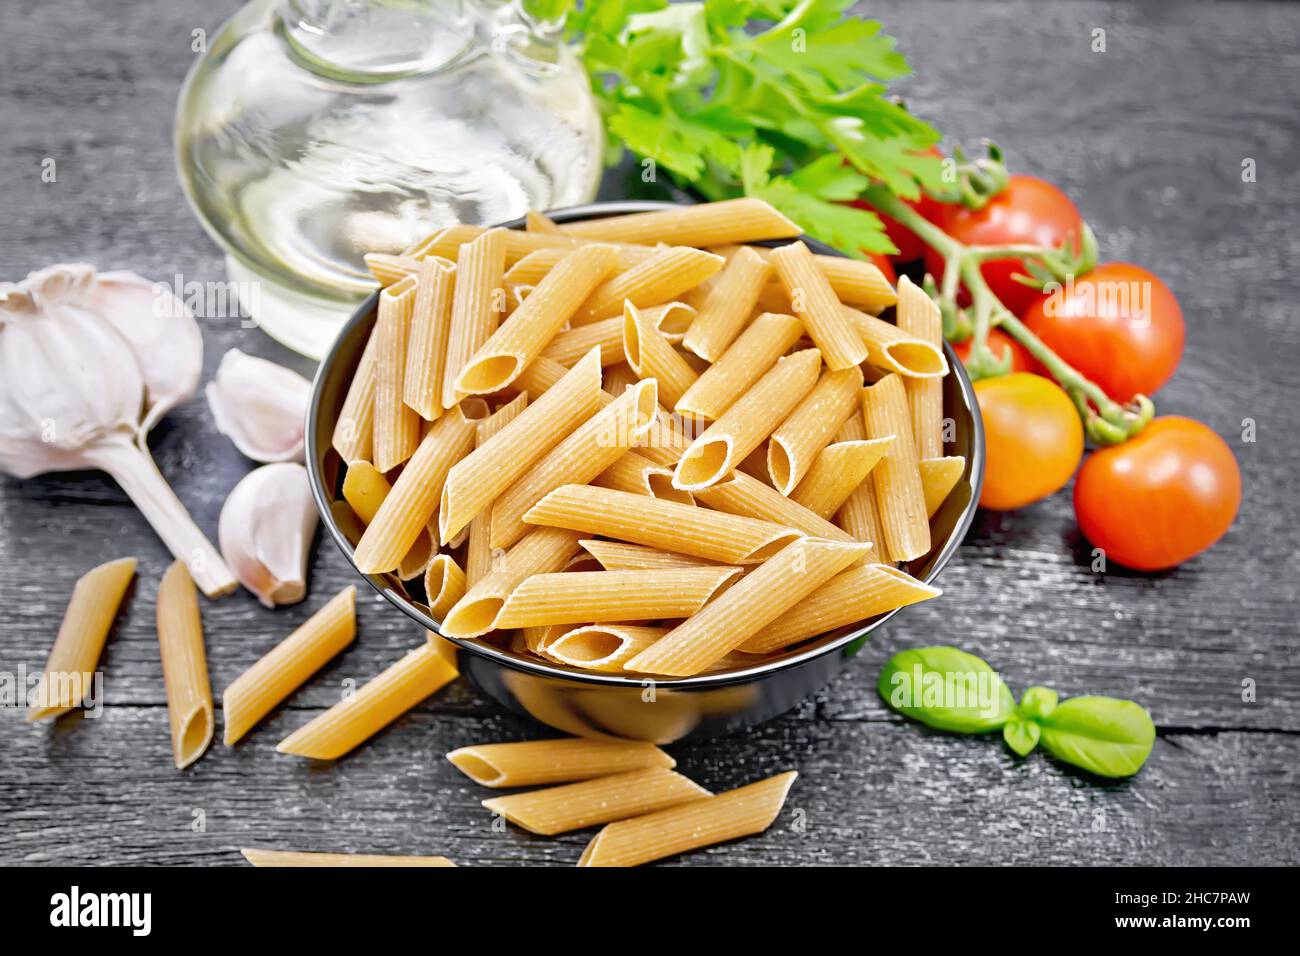 Whole grain flour penne pasta in a bowl, tomatoes, garlic, vegetable oil in a decanter and parsley on black wooden board background Stock Photo